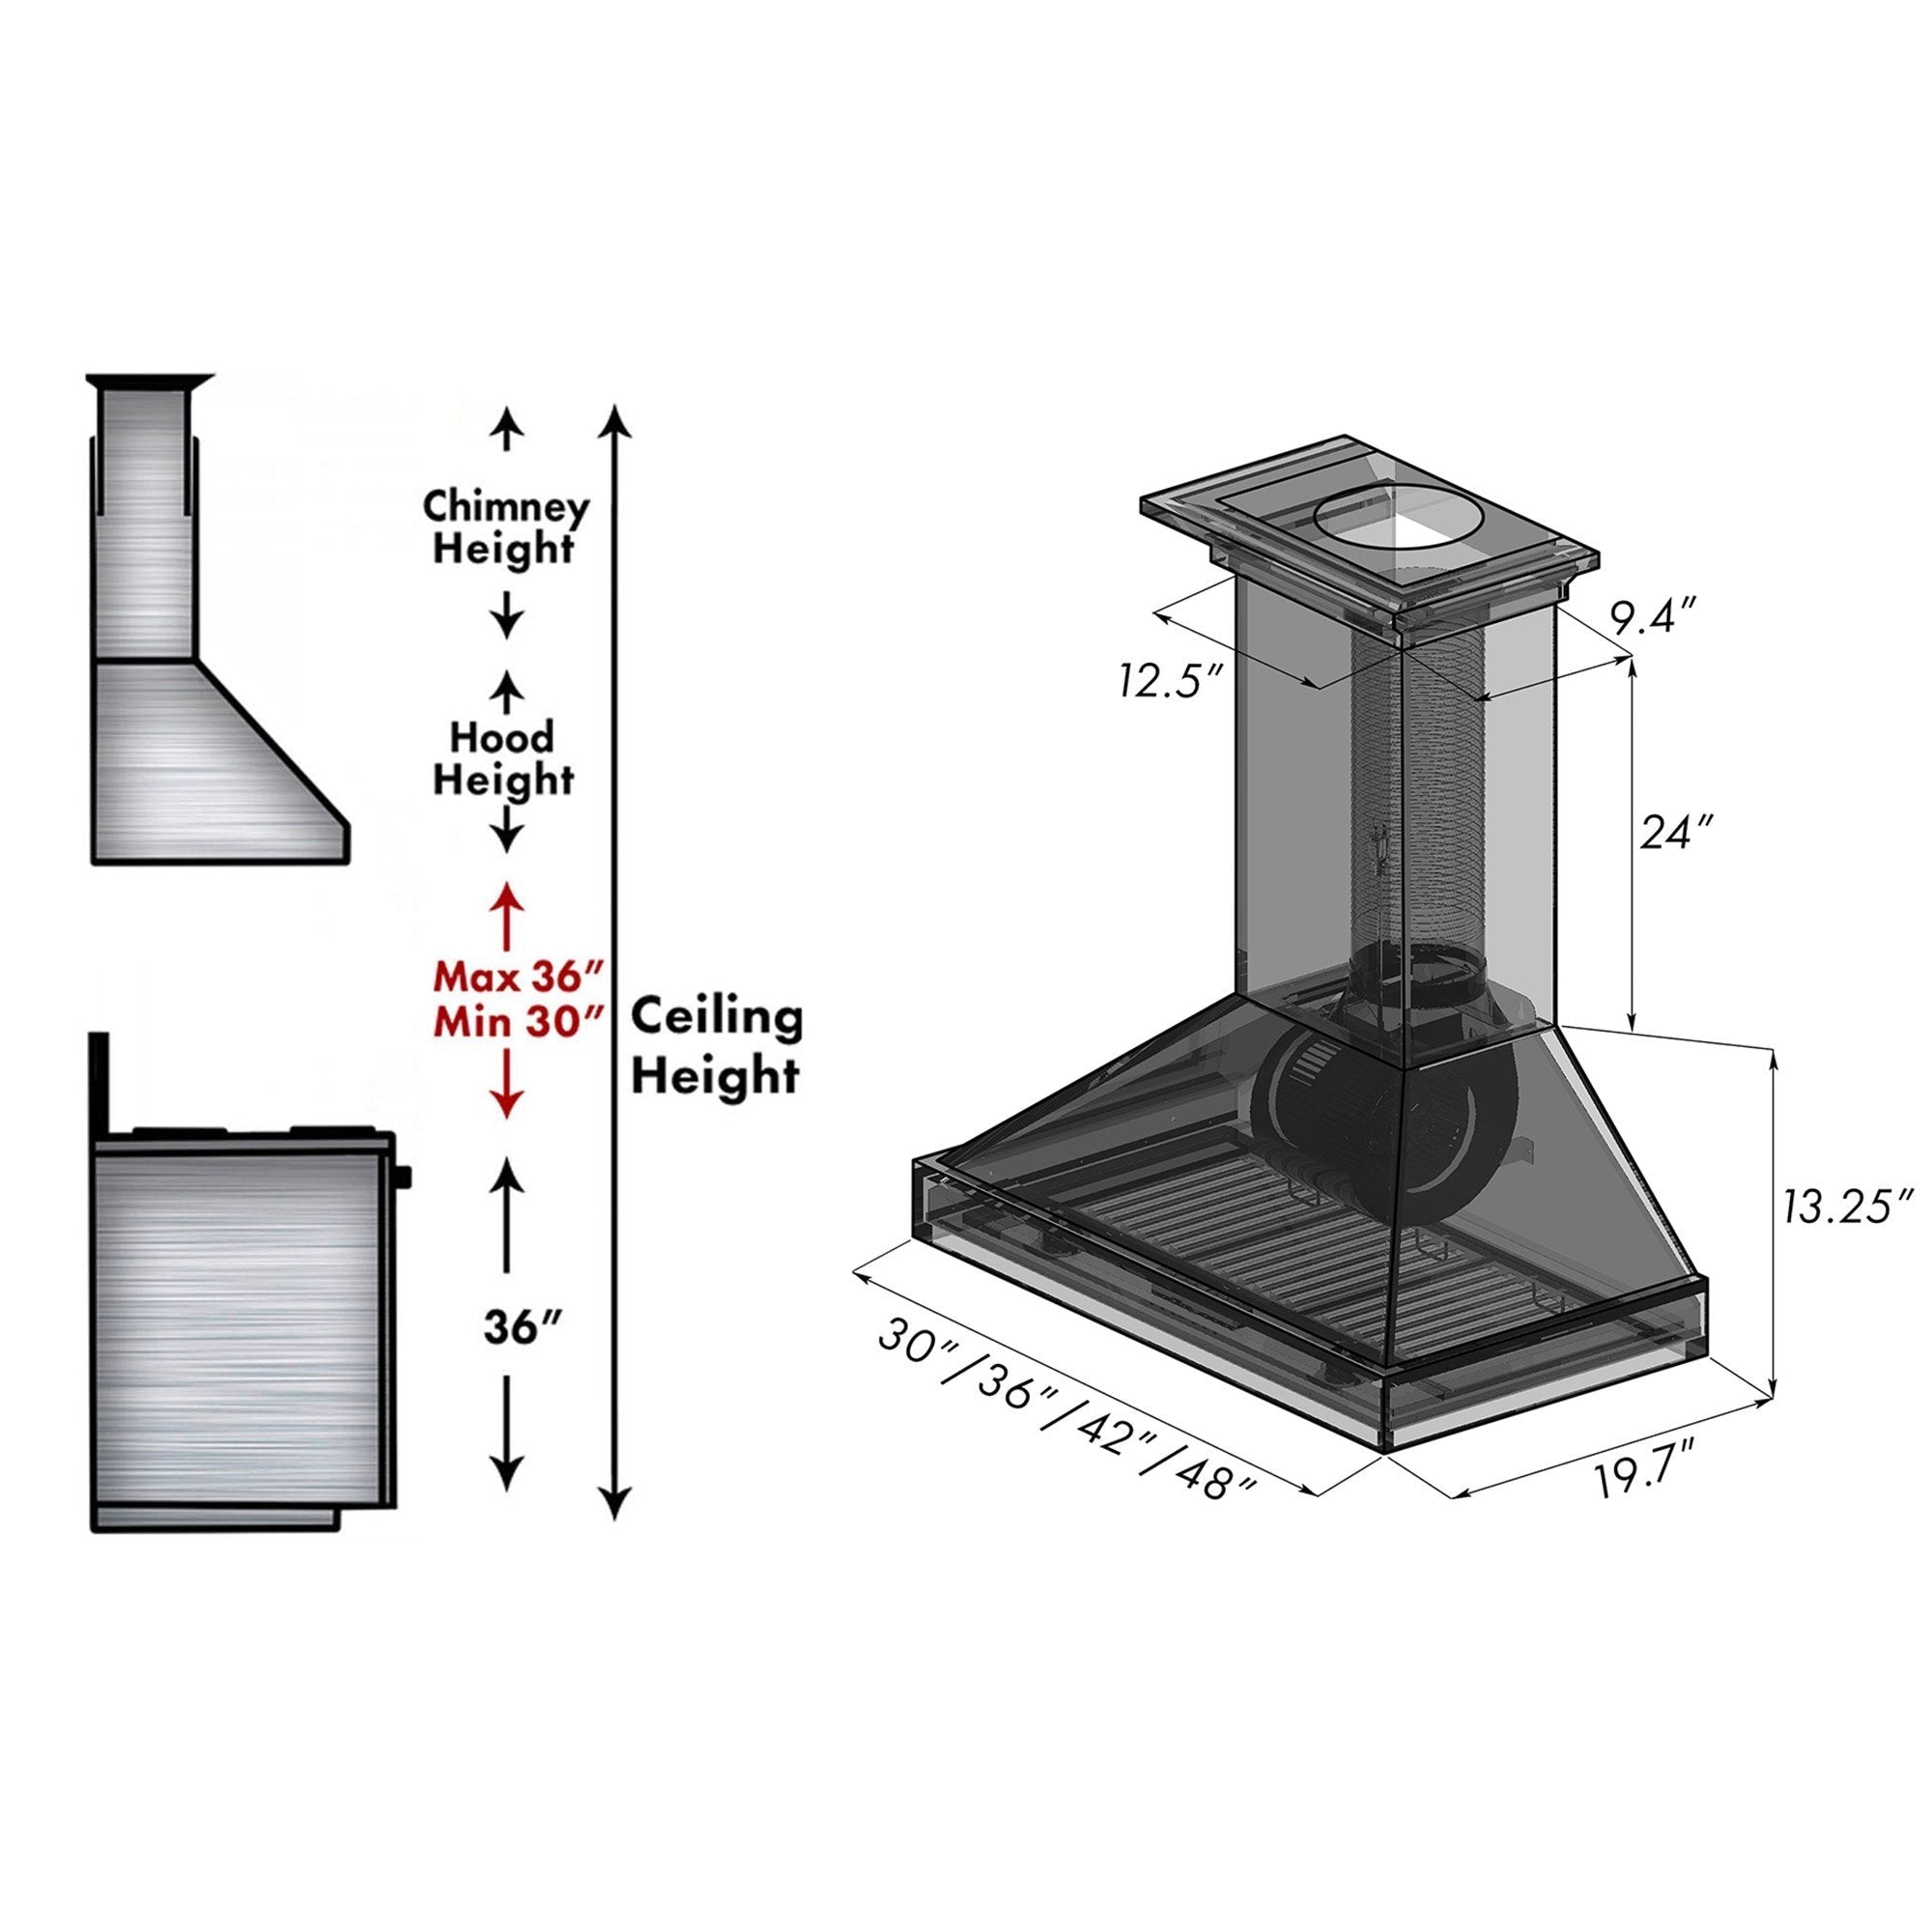 ZLINE Convertible Vent Wooden Wall Mount Range Hood in Walnut (KBRR) dimensional measurements and chimney height guide.